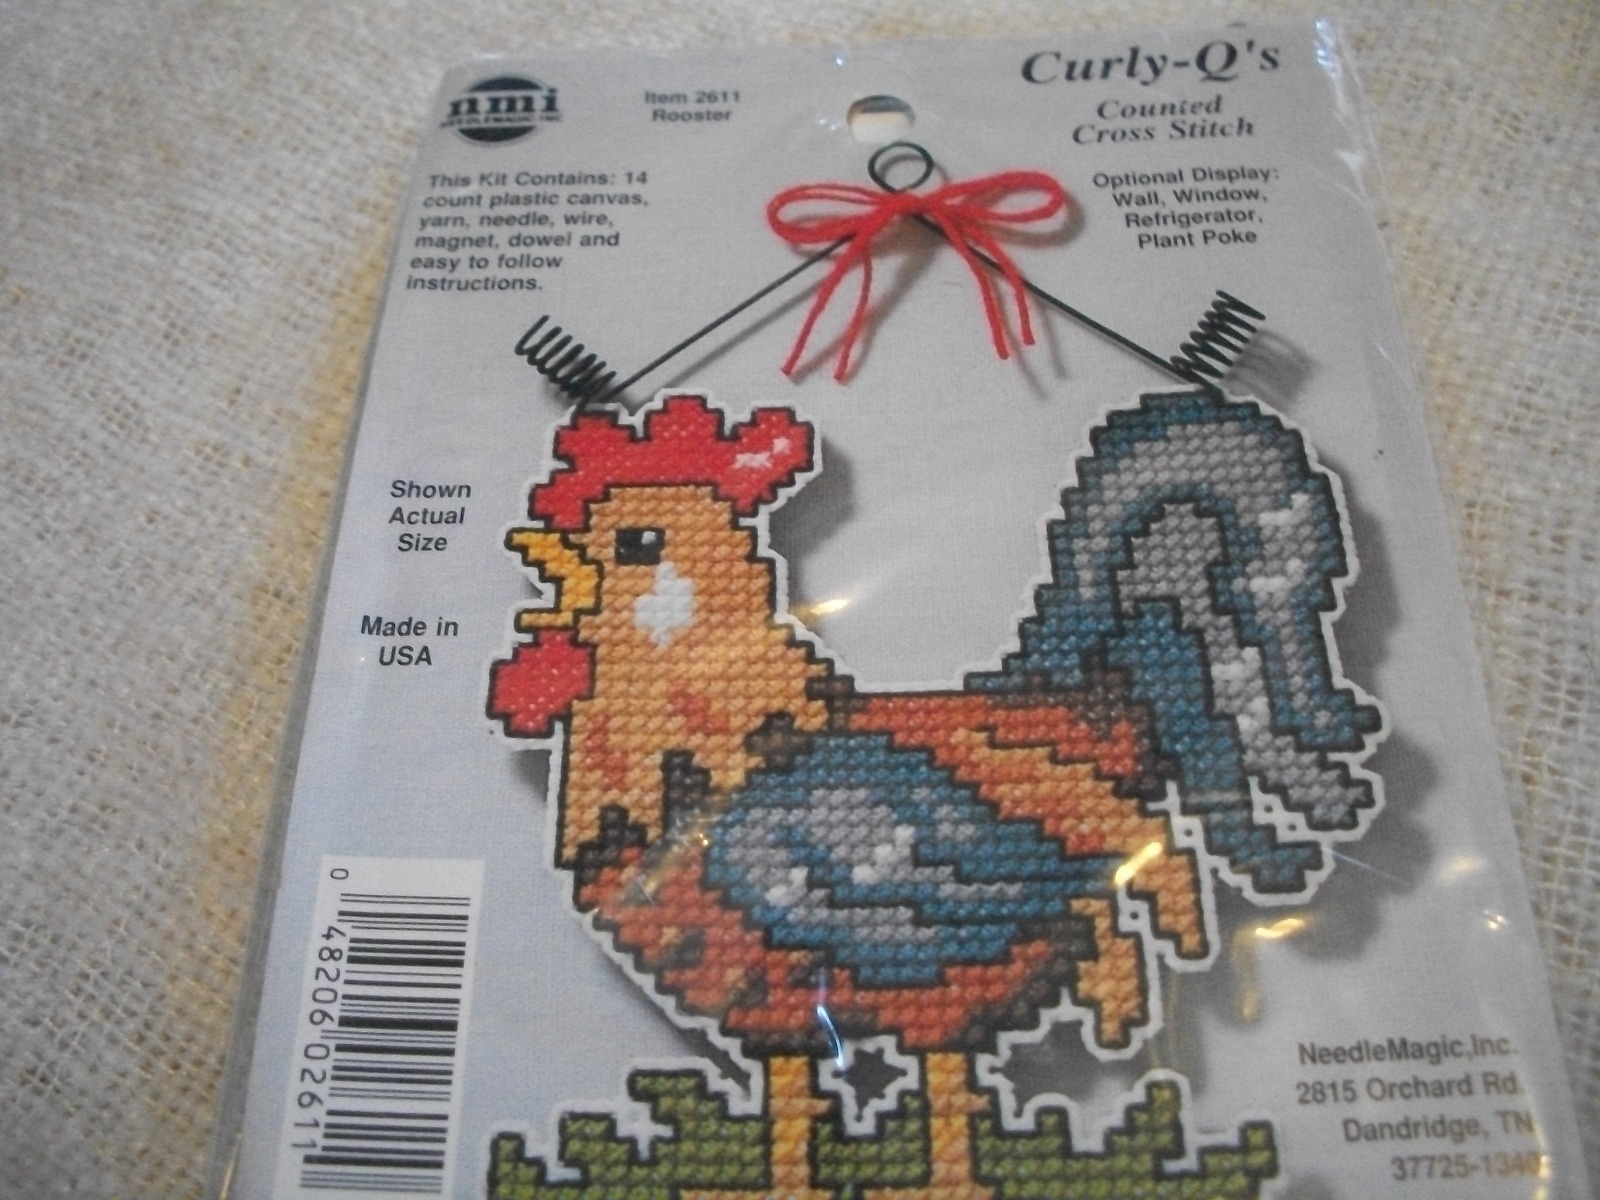 Rooster Counted Cross Stitch Kit - $5.00